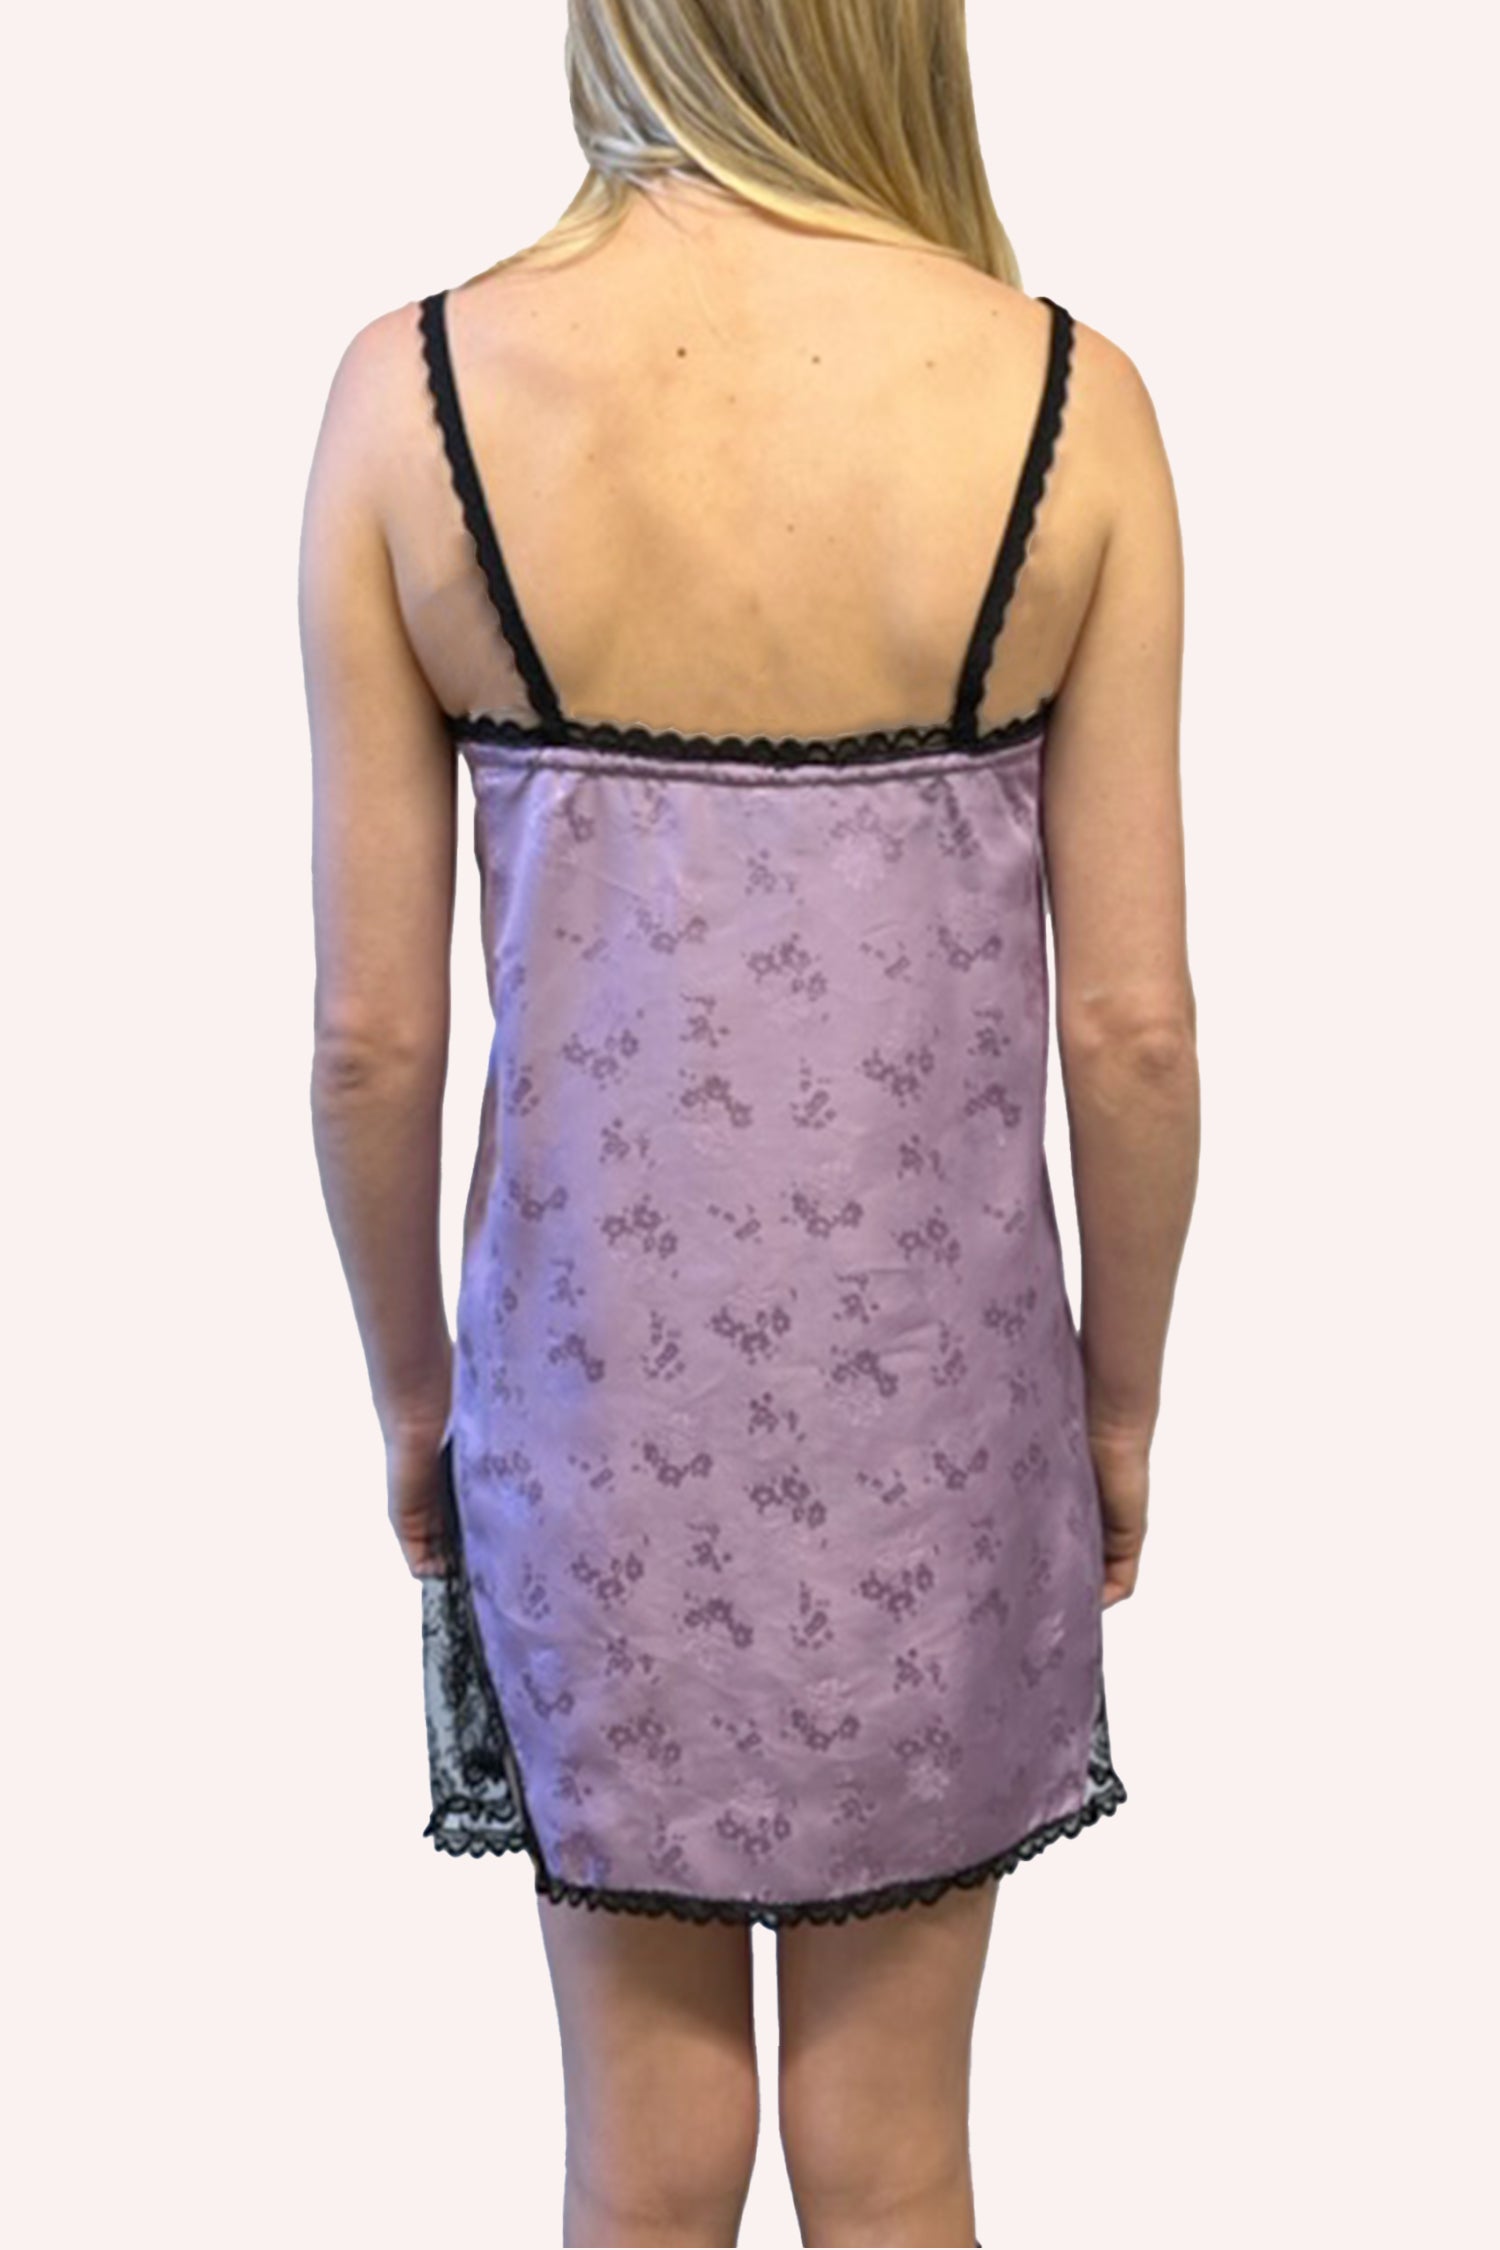 Sleeveless lavender dress, black lace at hems & straps, mid-thigh long, low cut on back